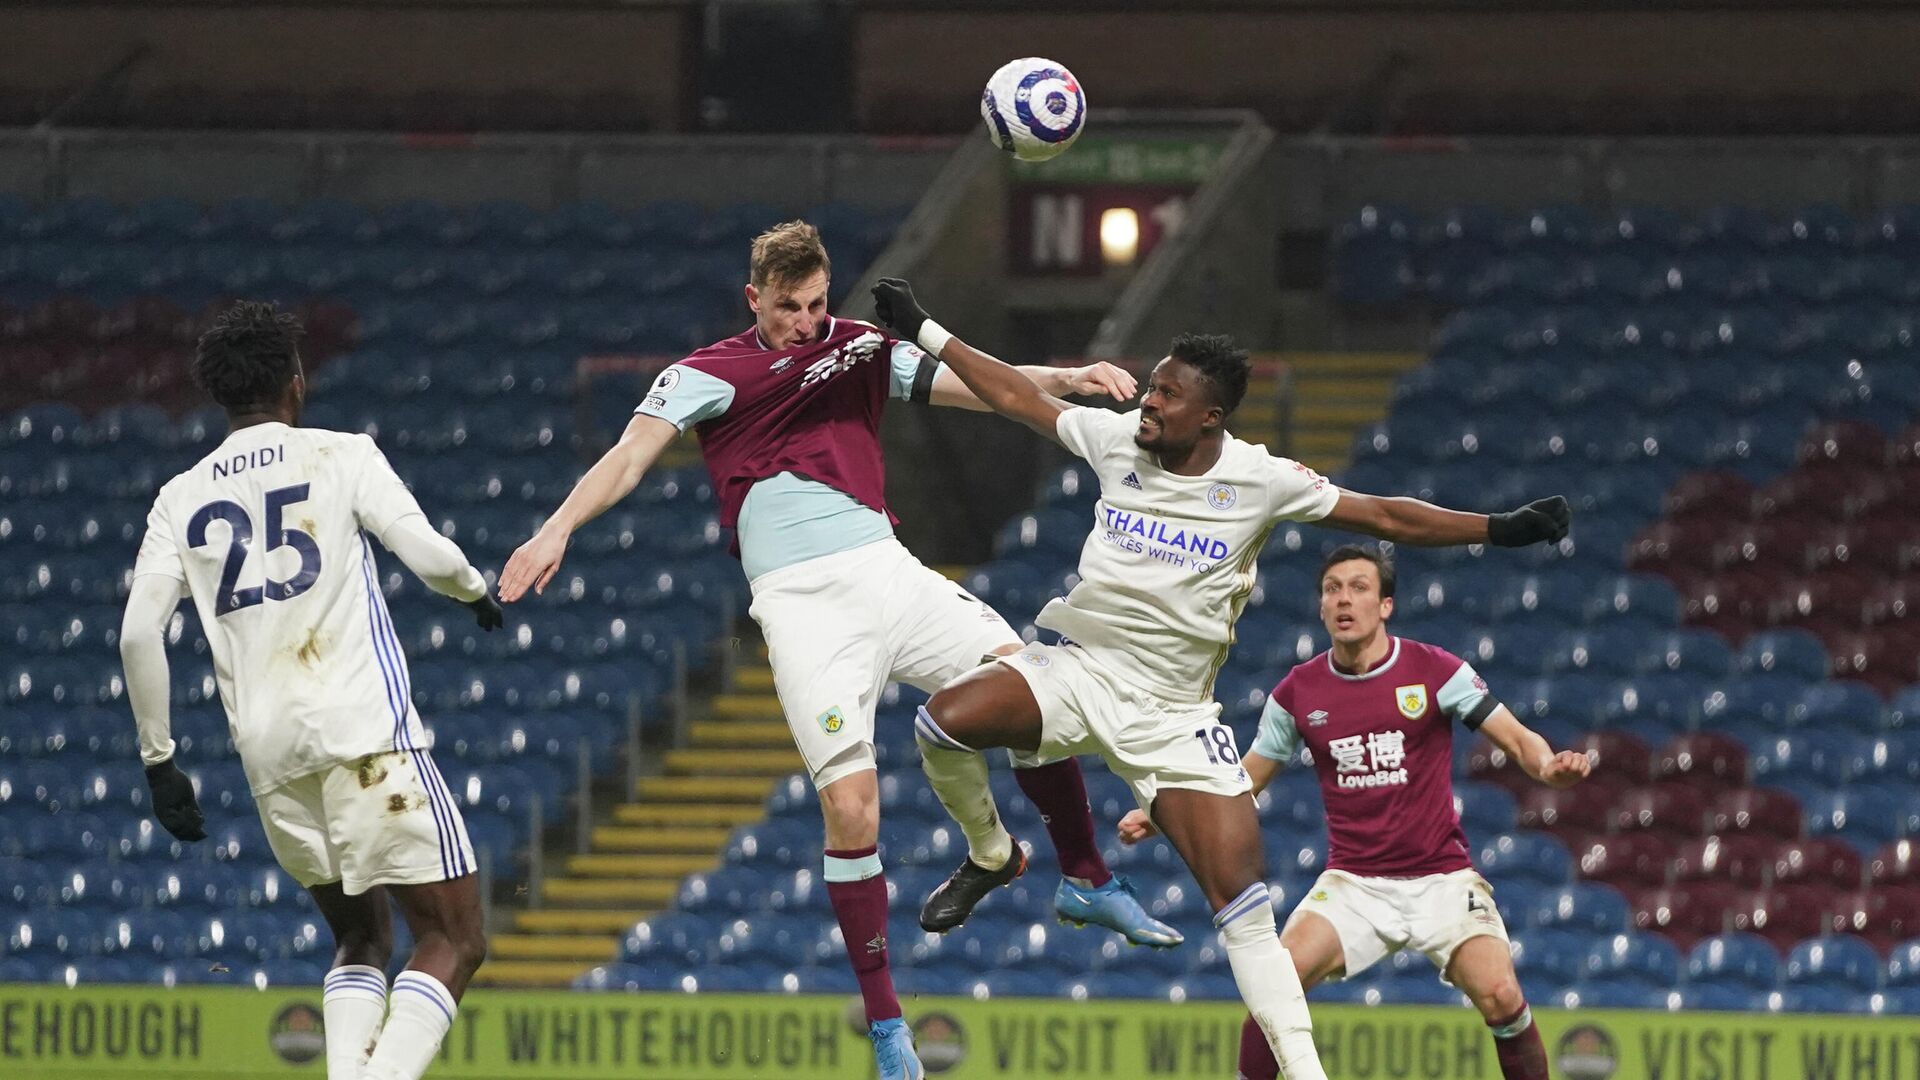 Burnley's New Zealand striker Chris Wood (2L) heads the ball as Leicester City's Ghanaian midfielder Daniel Amartey (2R) tries to defend during the English Premier League football match between Burnley and Leicester City at Turf Moor in Burnley, north west England on March 3, 2021. (Photo by Jon Super / POOL / AFP) / RESTRICTED TO EDITORIAL USE. No use with unauthorized audio, video, data, fixture lists, club/league logos or 'live' services. Online in-match use limited to 120 images. An additional 40 images may be used in extra time. No video emulation. Social media in-match use limited to 120 images. An additional 40 images may be used in extra time. No use in betting publications, games or single club/league/player publications. /  - РИА Новости, 1920, 03.03.2021